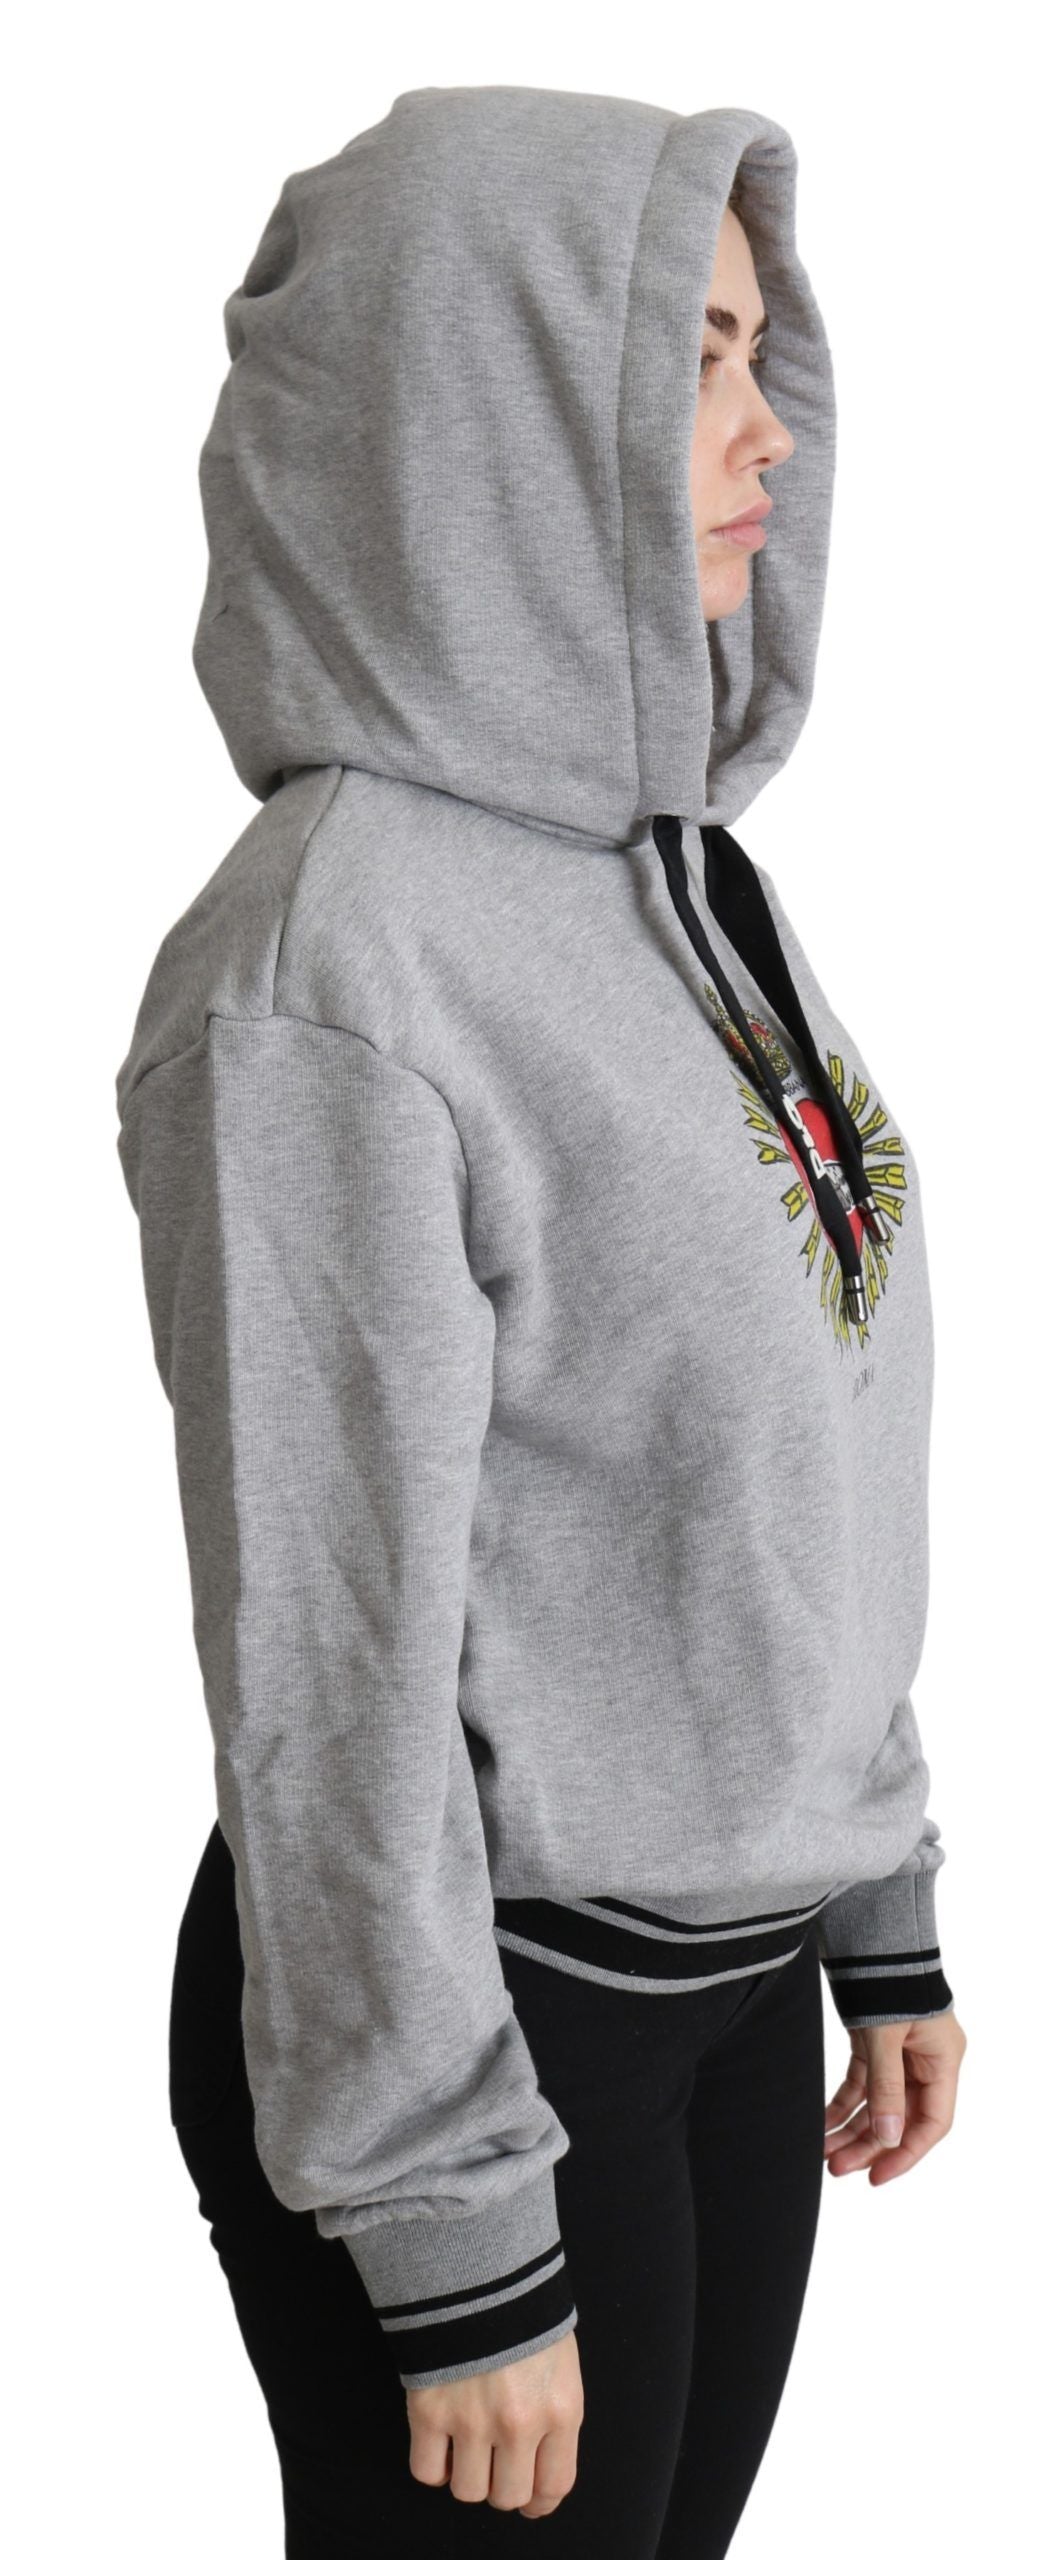 Exclusive Hooded Gray Cotton Sweater